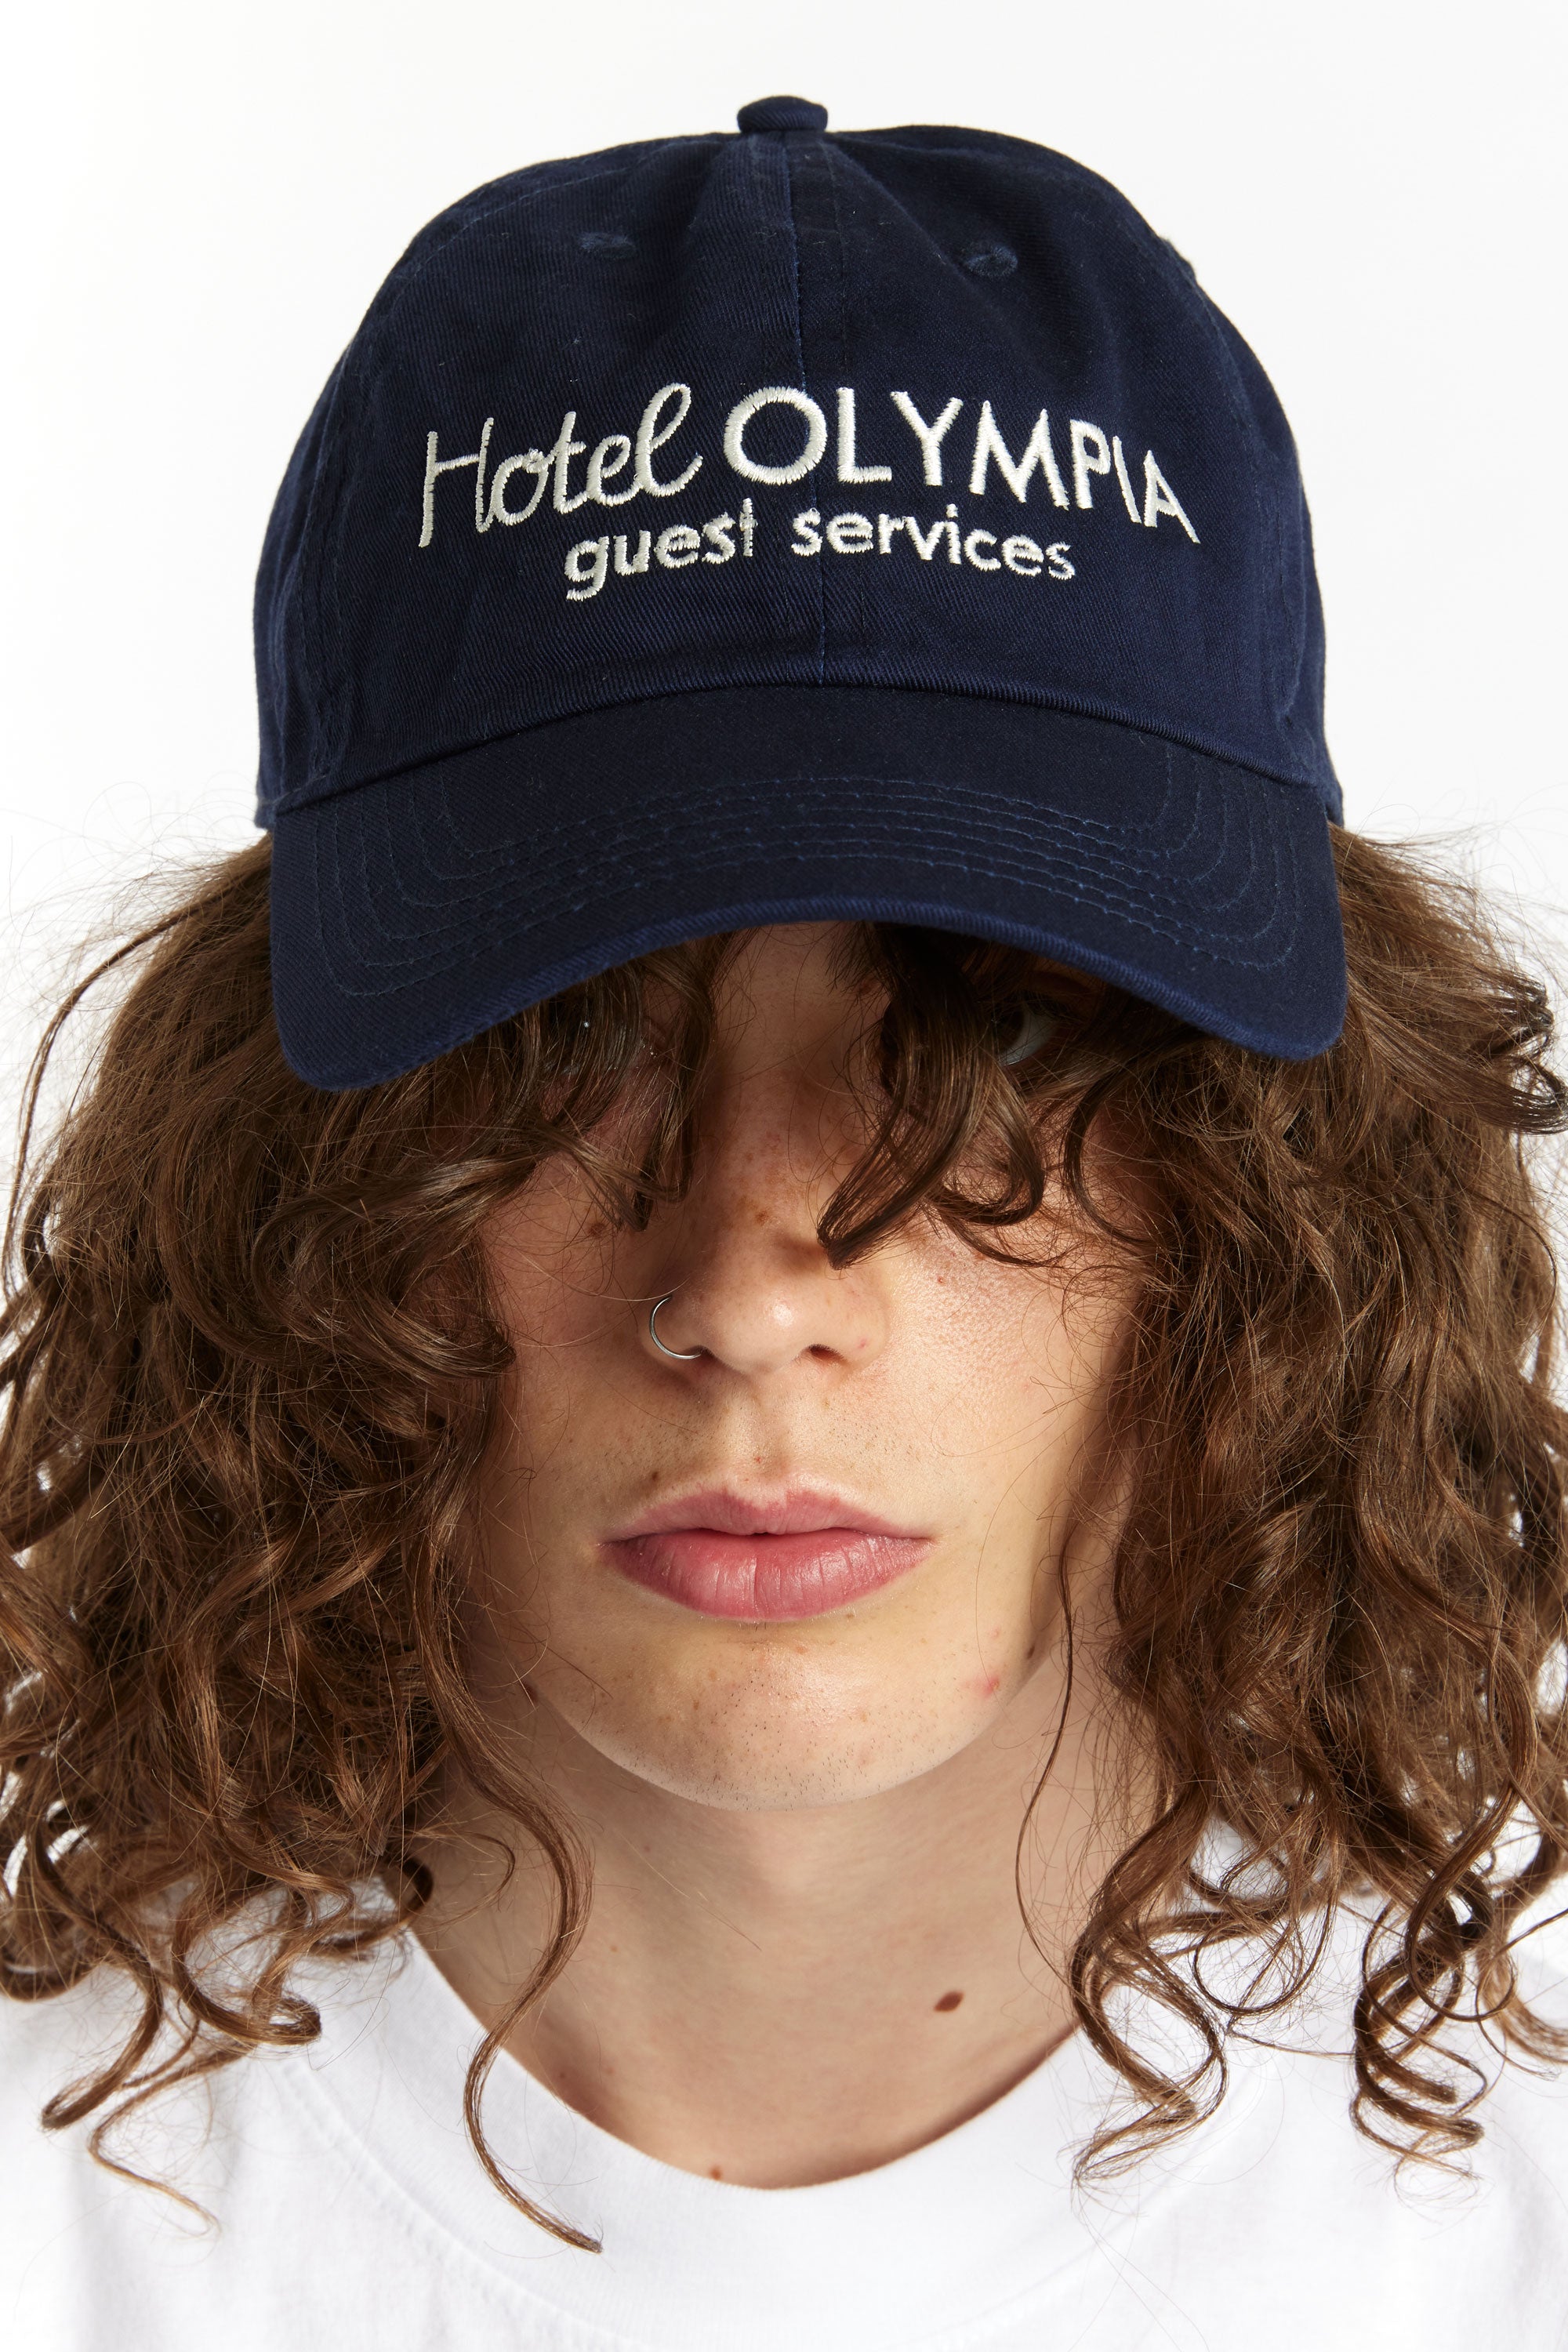 HOTEL OLYMPIA – P.A.M. (Perks And Mini)